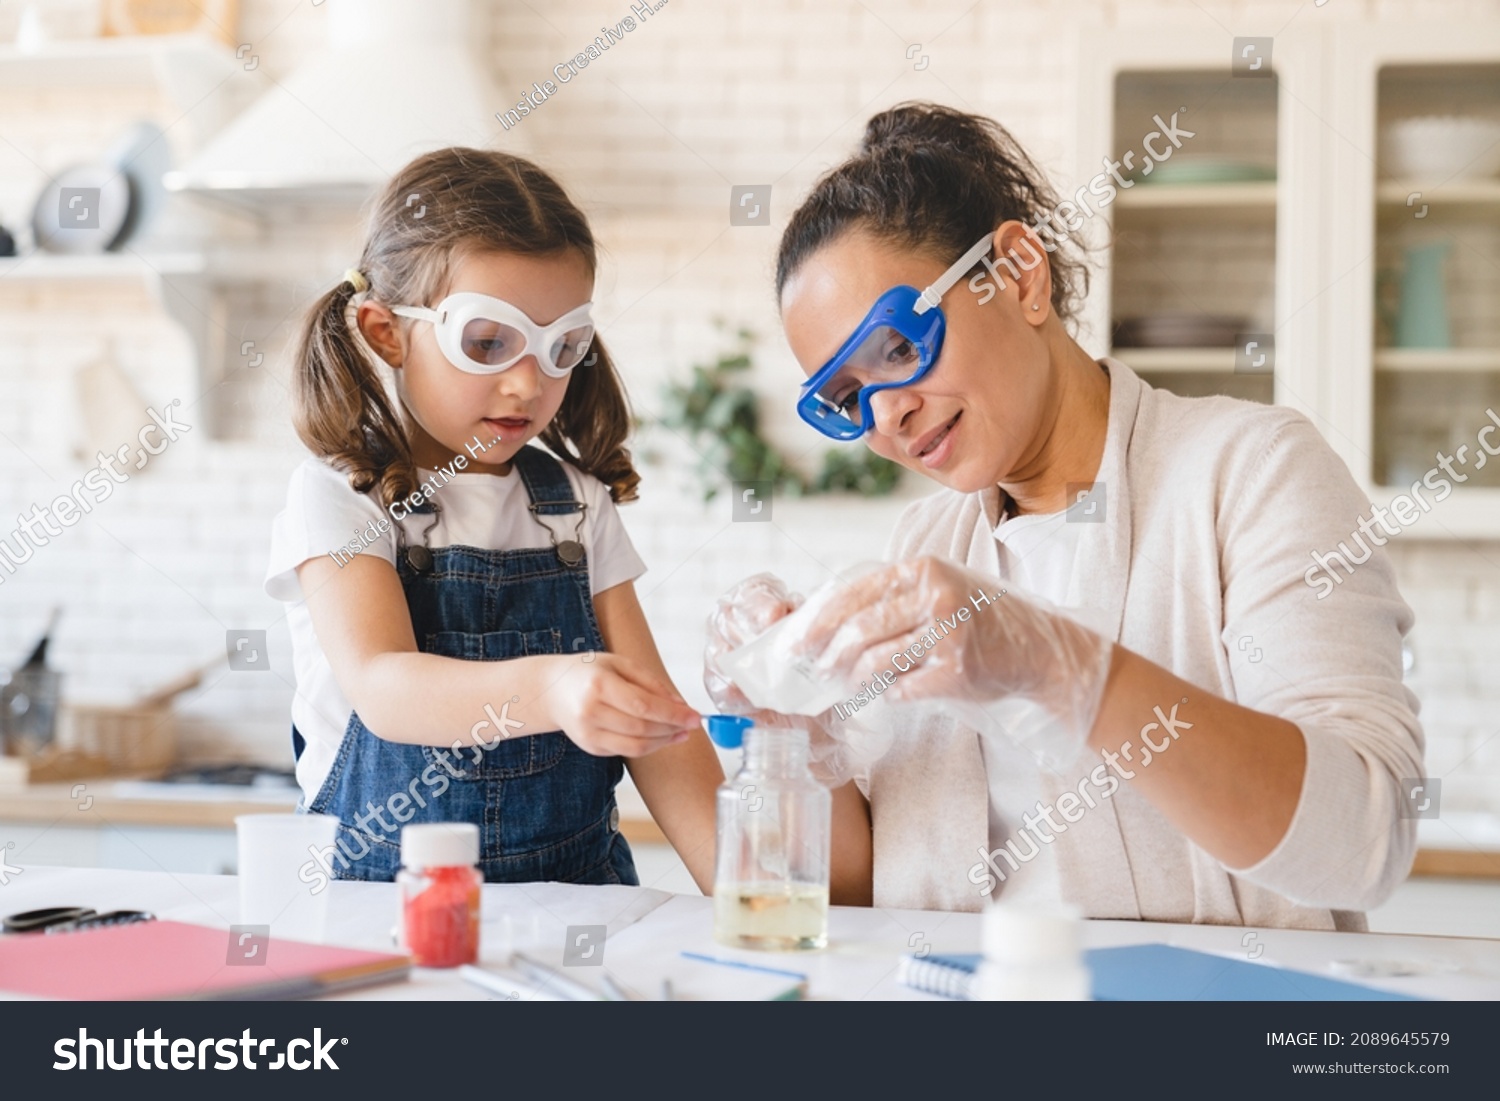 Scientific experiment at home. Laboratory tests for school homework. Parent mother with daughter kid making chemical test at home kitchen. Nanny babysitter teacher help in protective glasses #2089645579